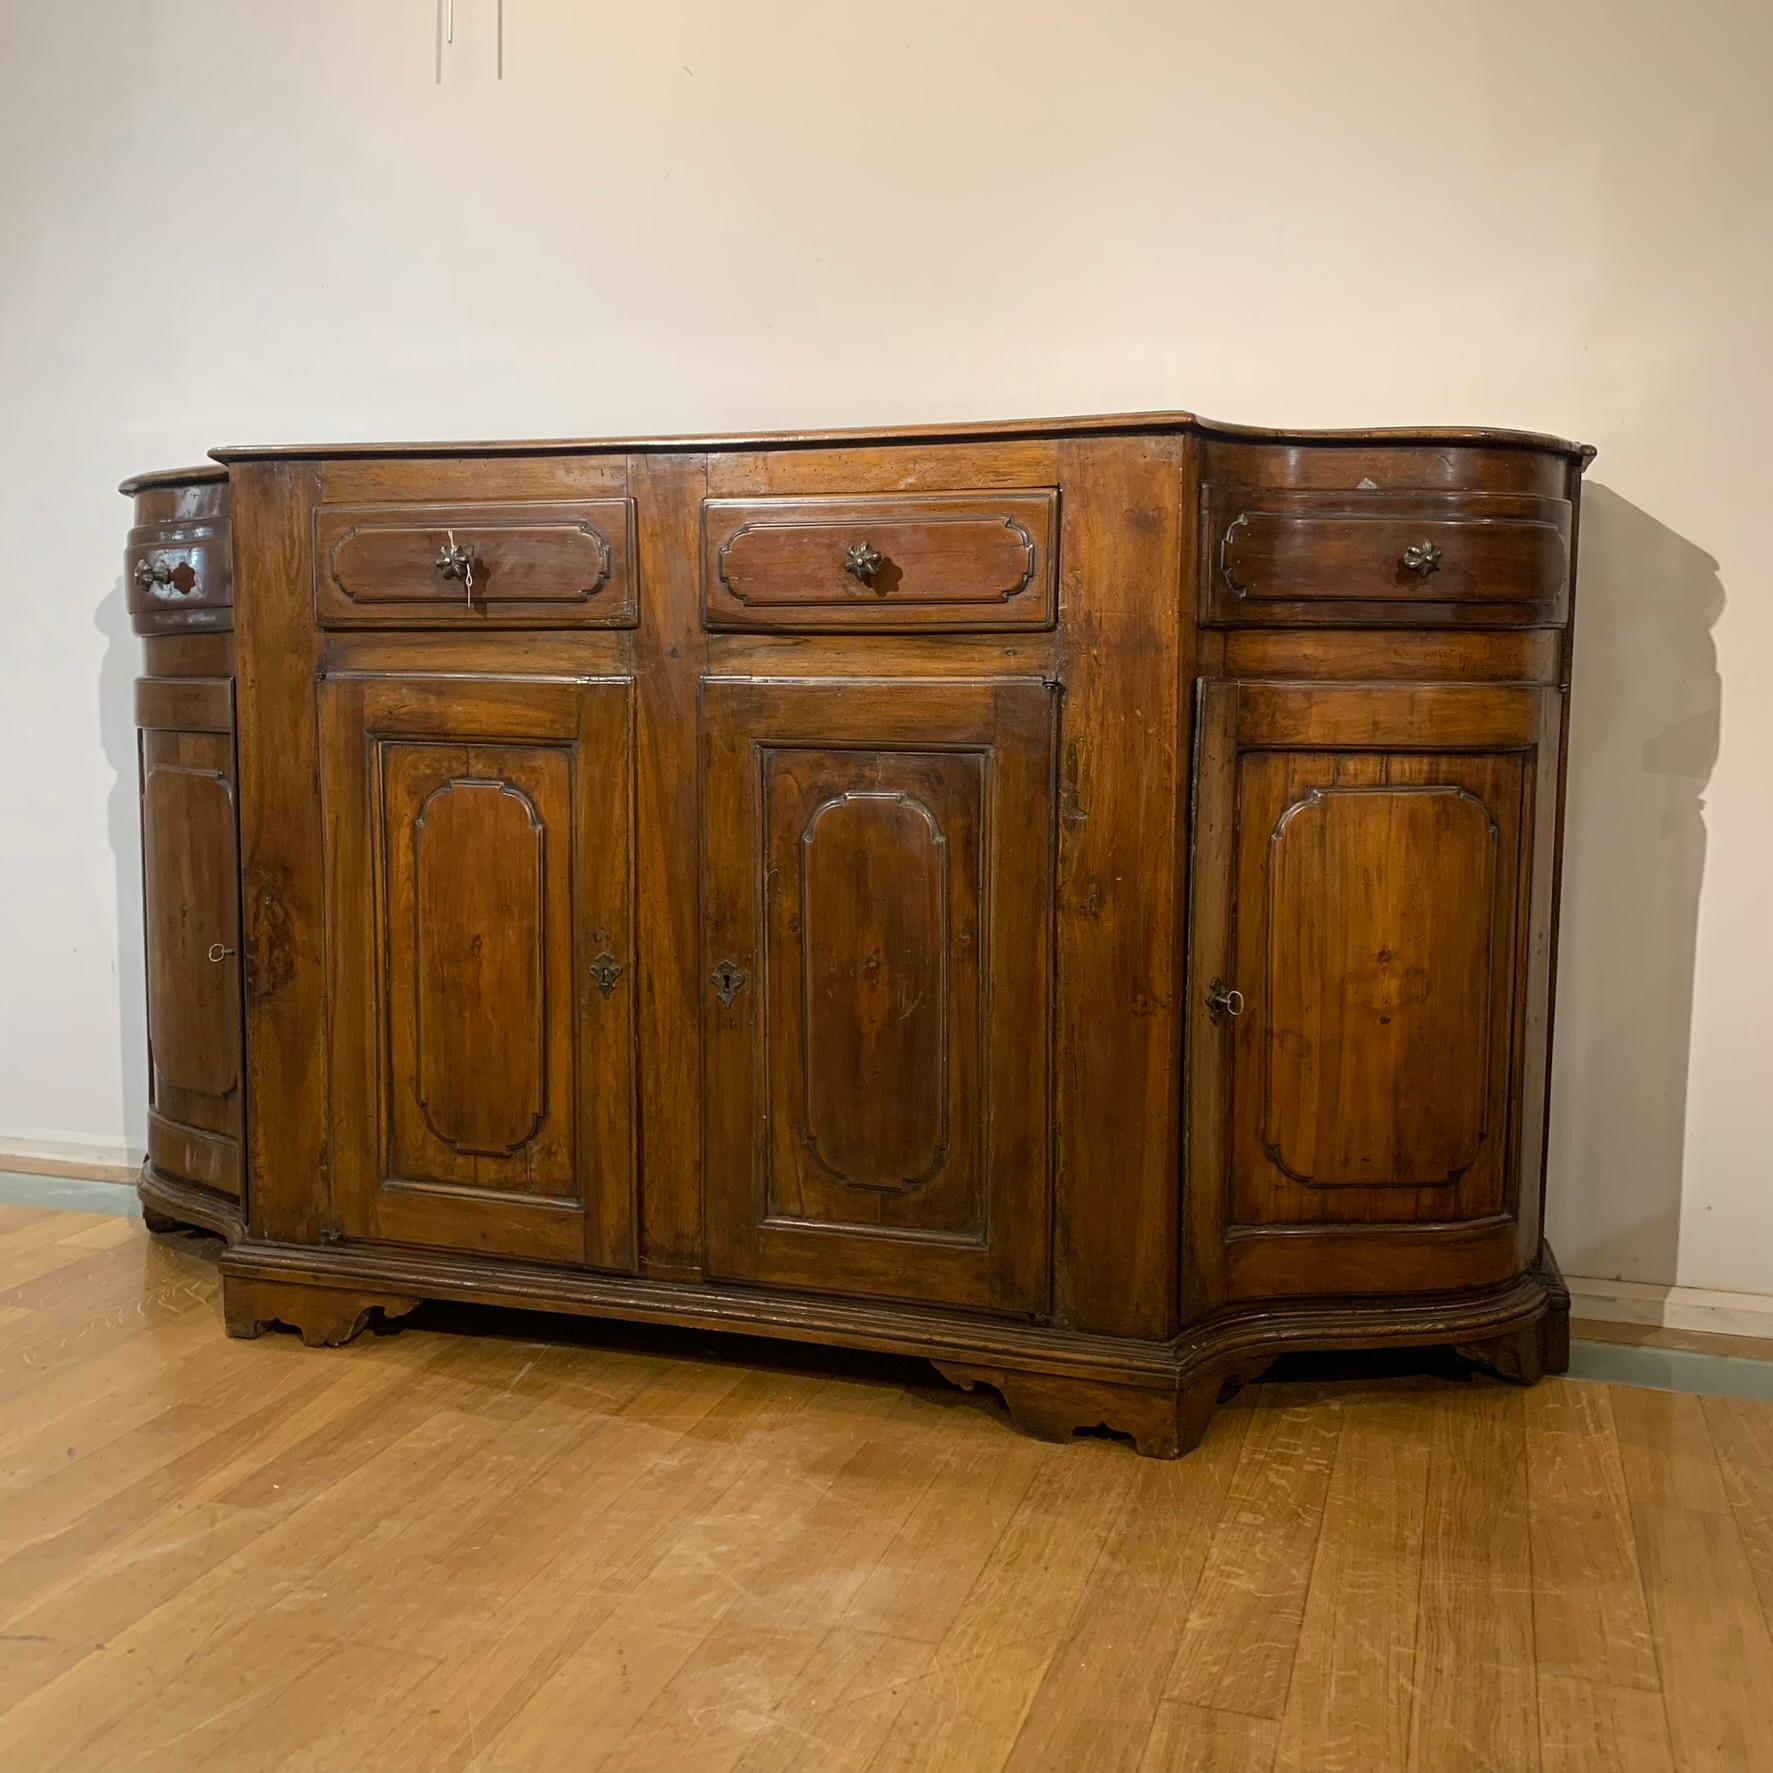 Beautiful sideboard in solid walnut with fir bottoms, owl beak top, double move notched sides, molded drawers and doors.
Of Venetian manufacture, made in the transition period between Louis XIV and Louis XV.